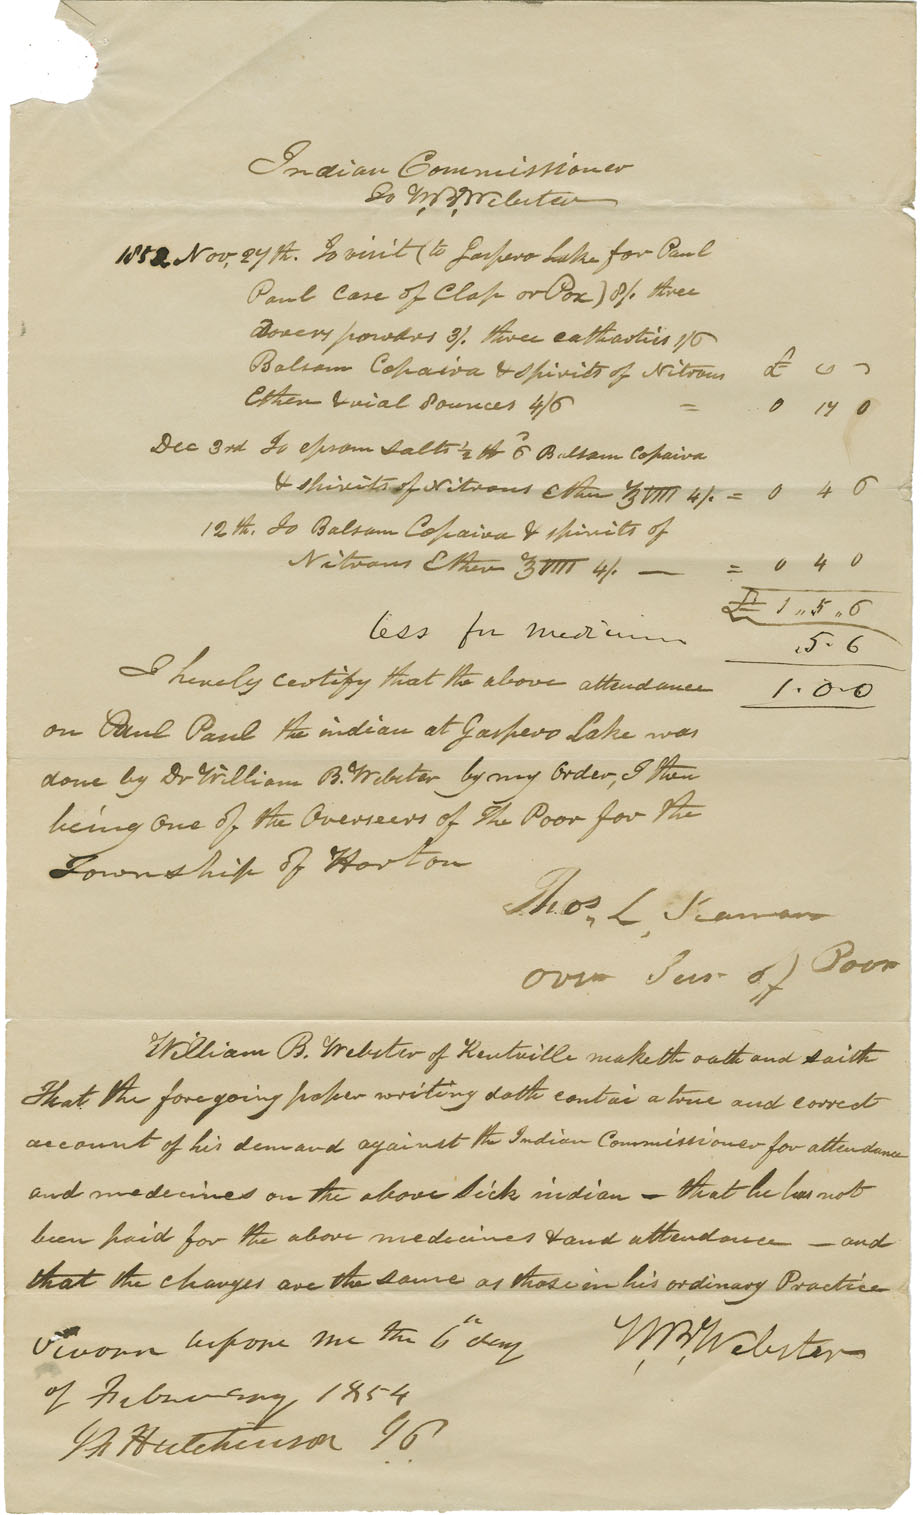 Petition of Dr. Webster for payment for medical services to Paul Paul and his son of Gaspereaux Lake.